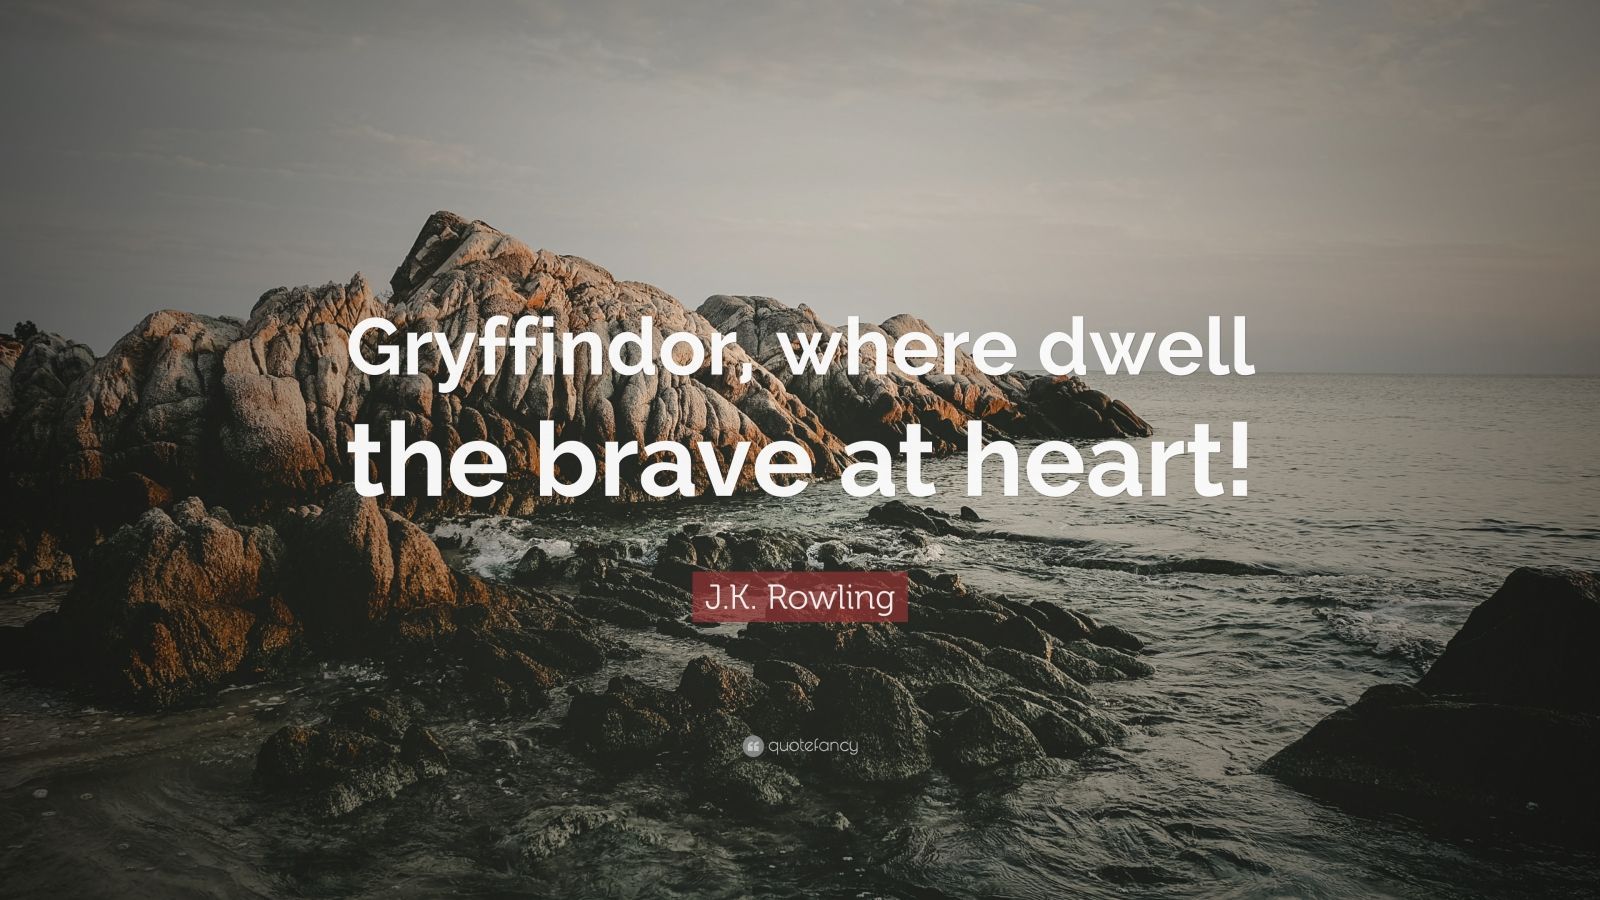 J.K. Rowling Quote: “Gryffindor, where dwell the brave at heart